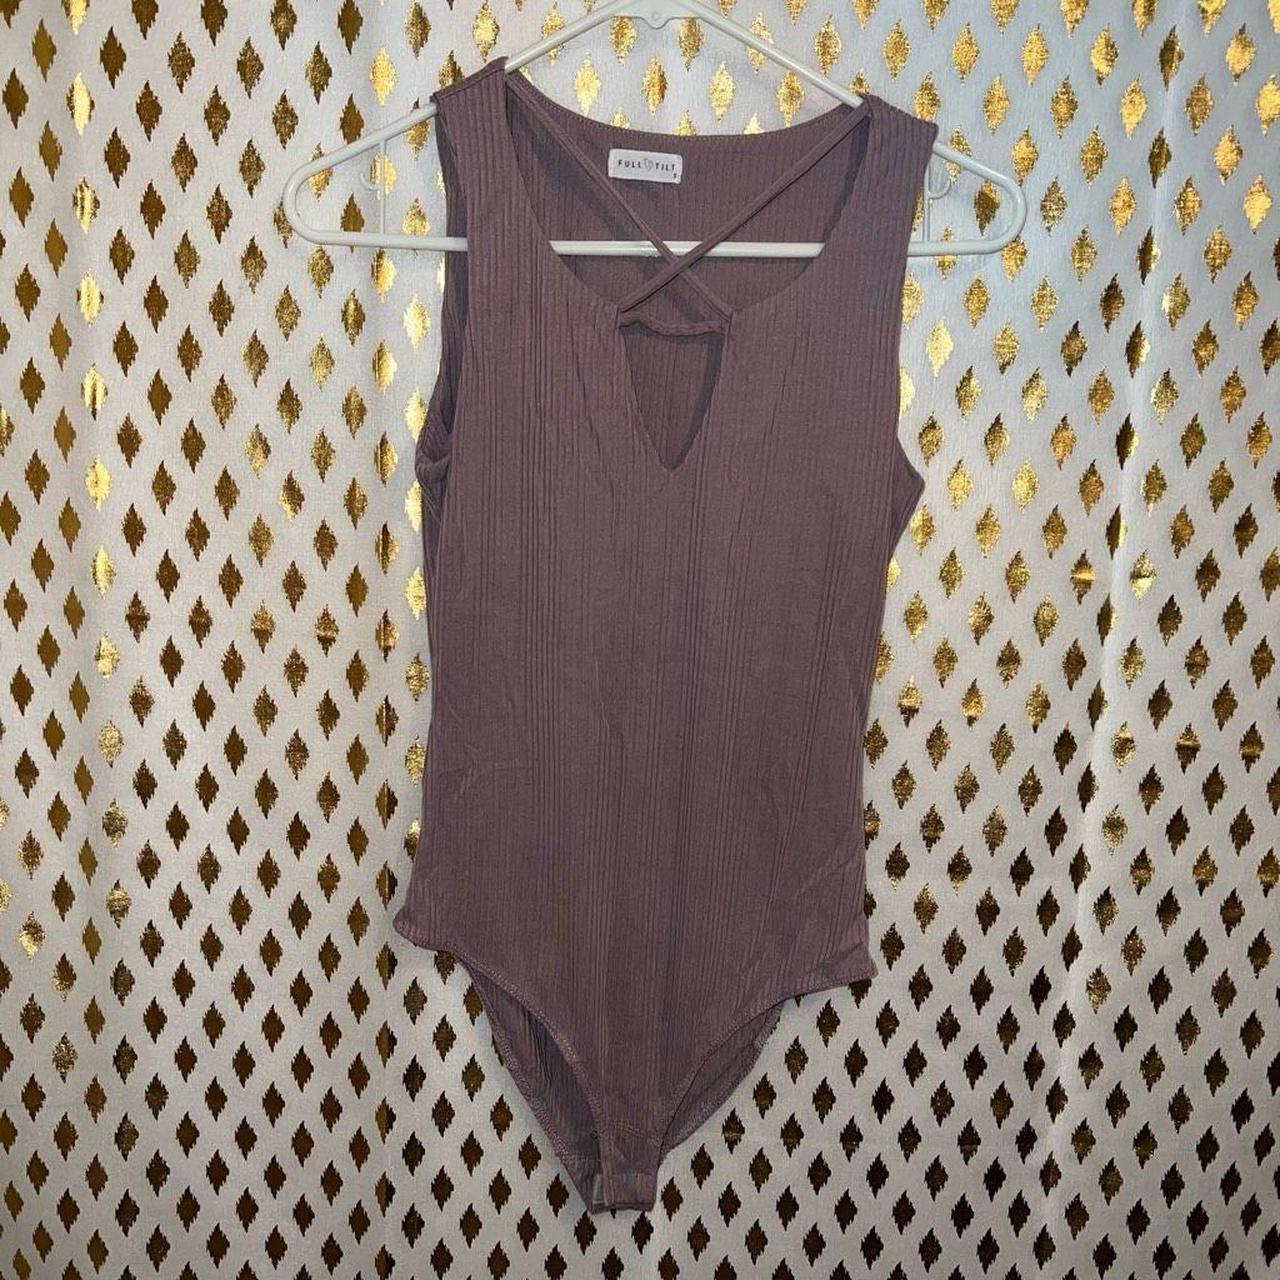 Fall Risk Women's Purple and Pink Bodysuit